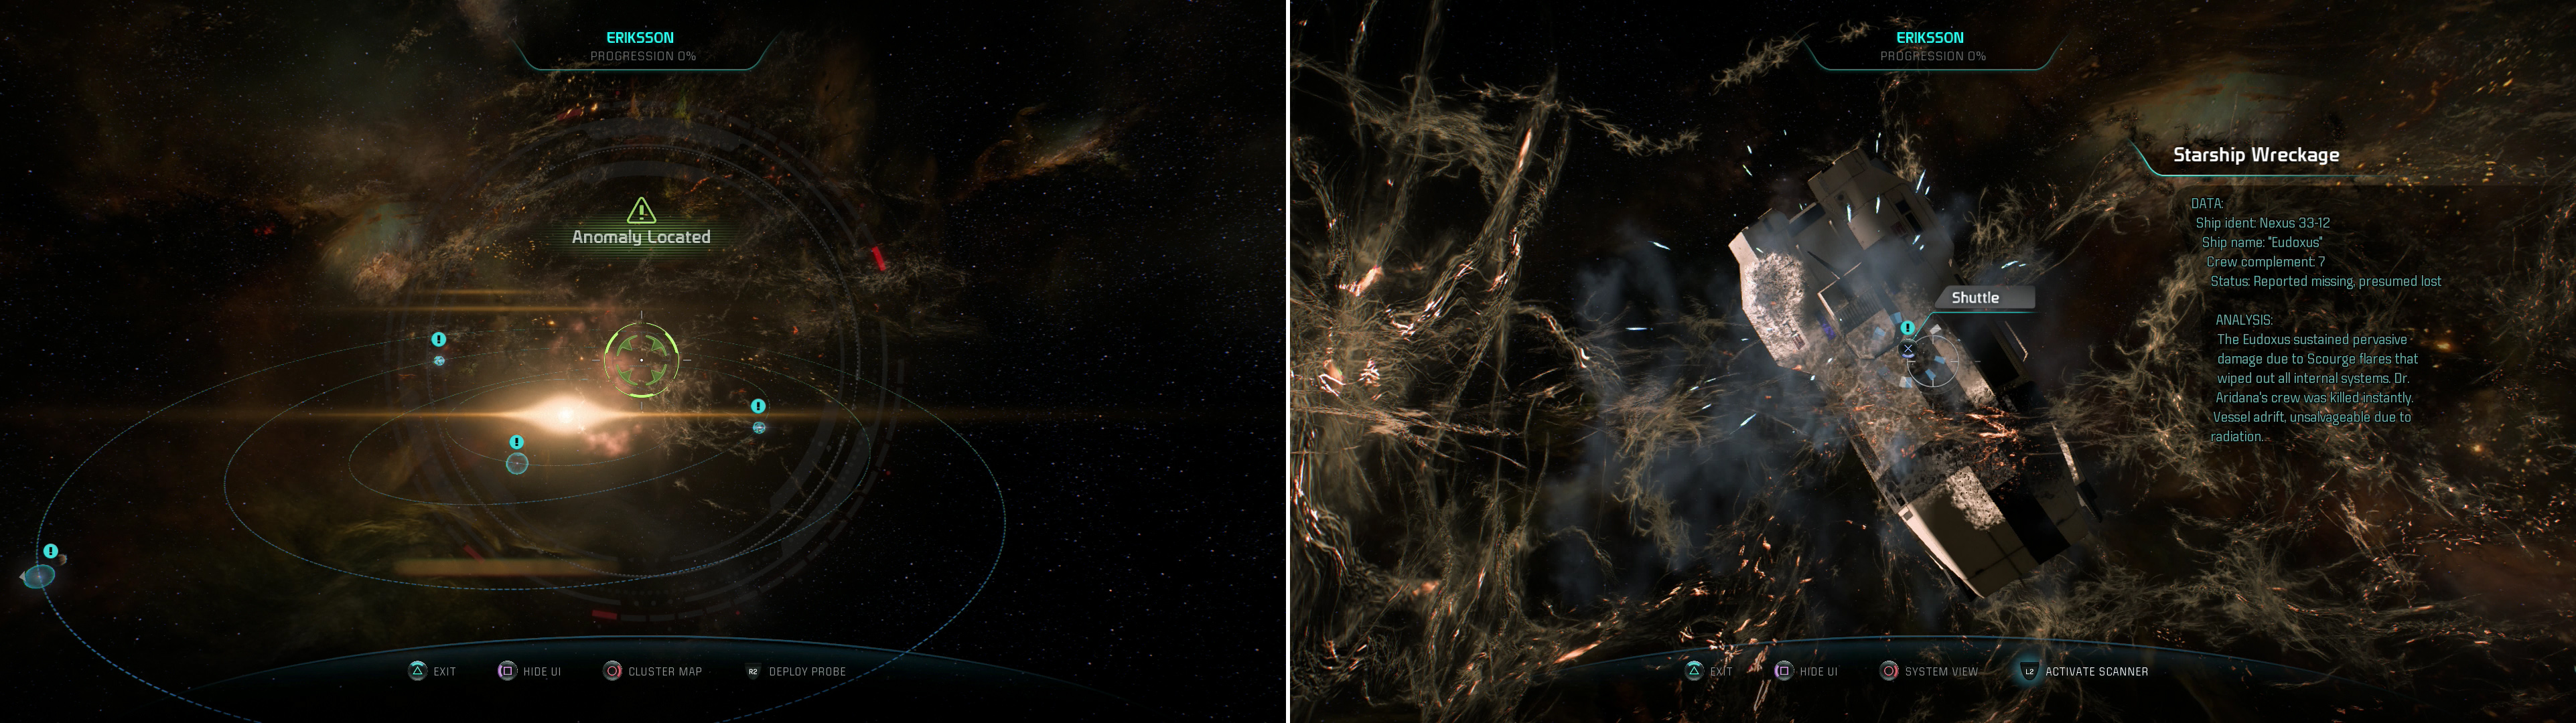 Scan the Eriksson system for anomalies to find a Starship Wreckage (left) then fly in for a closer look to confirm the fate of the scientists (right).